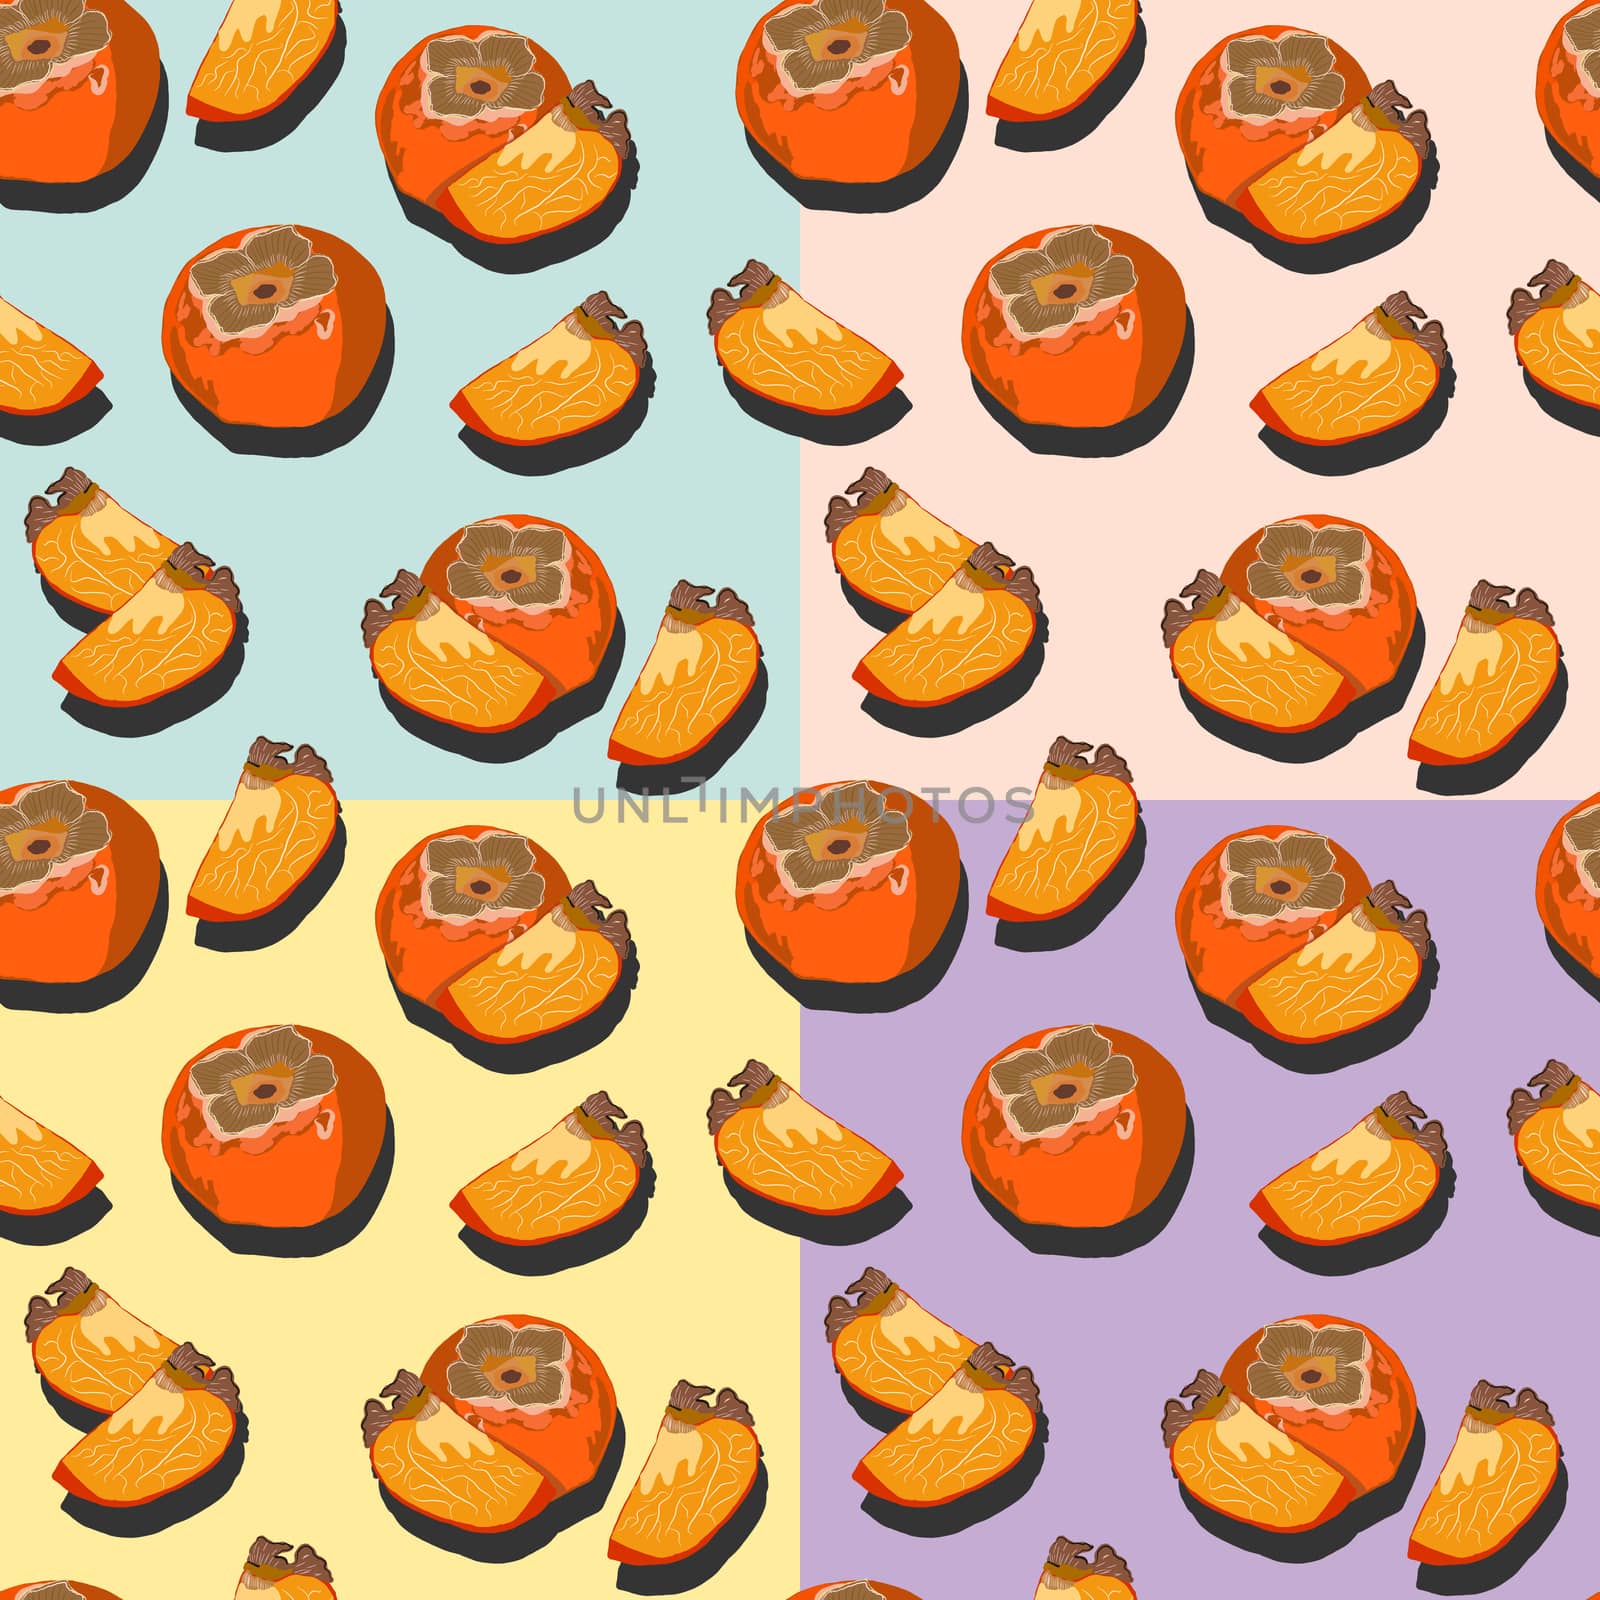 Persimmon whole and slices with shadow pop art seamless pattern on turquoise, pink, purple and yellow background. Sharon fruit pattern vector design for wallpapers, fabrics, textiles, packaging.